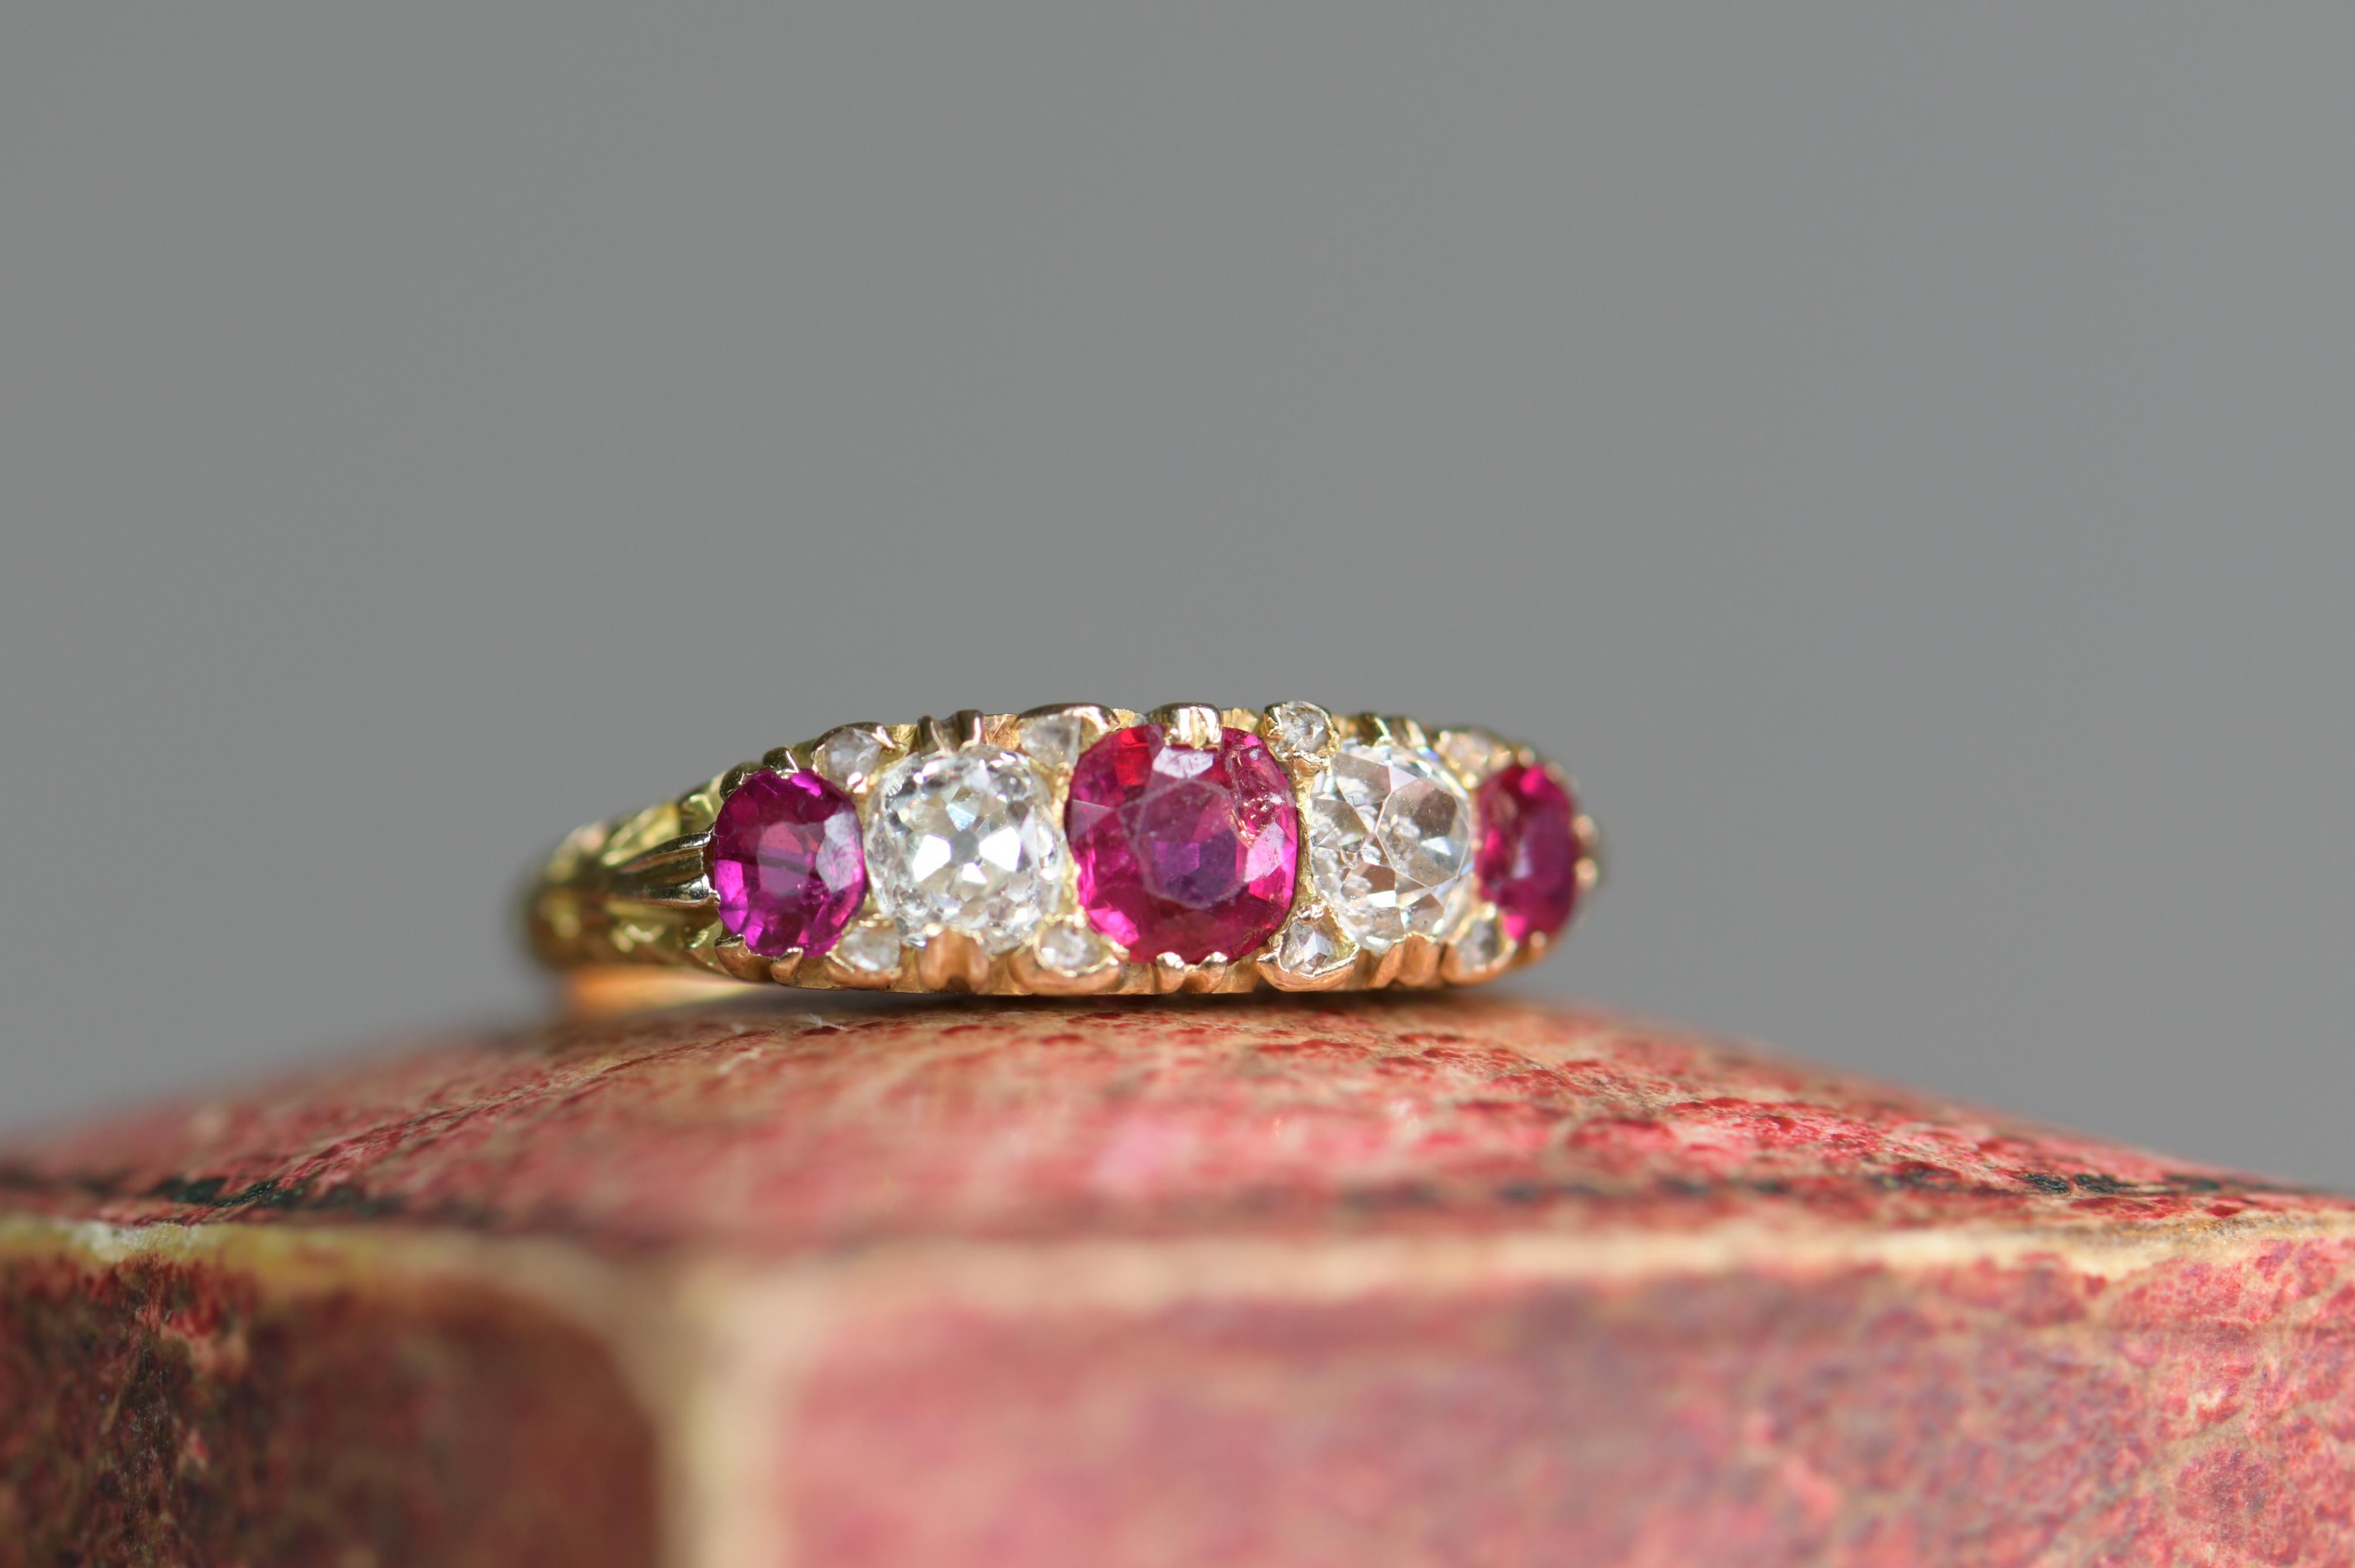 This is a Victorian 18ct yellow gold ring featuring three alternating rubies and two old cut diamonds with old-cut diamonds set in between each stone in a carved yellow gold shank.

The contrast of alternating colors works really well, one gem